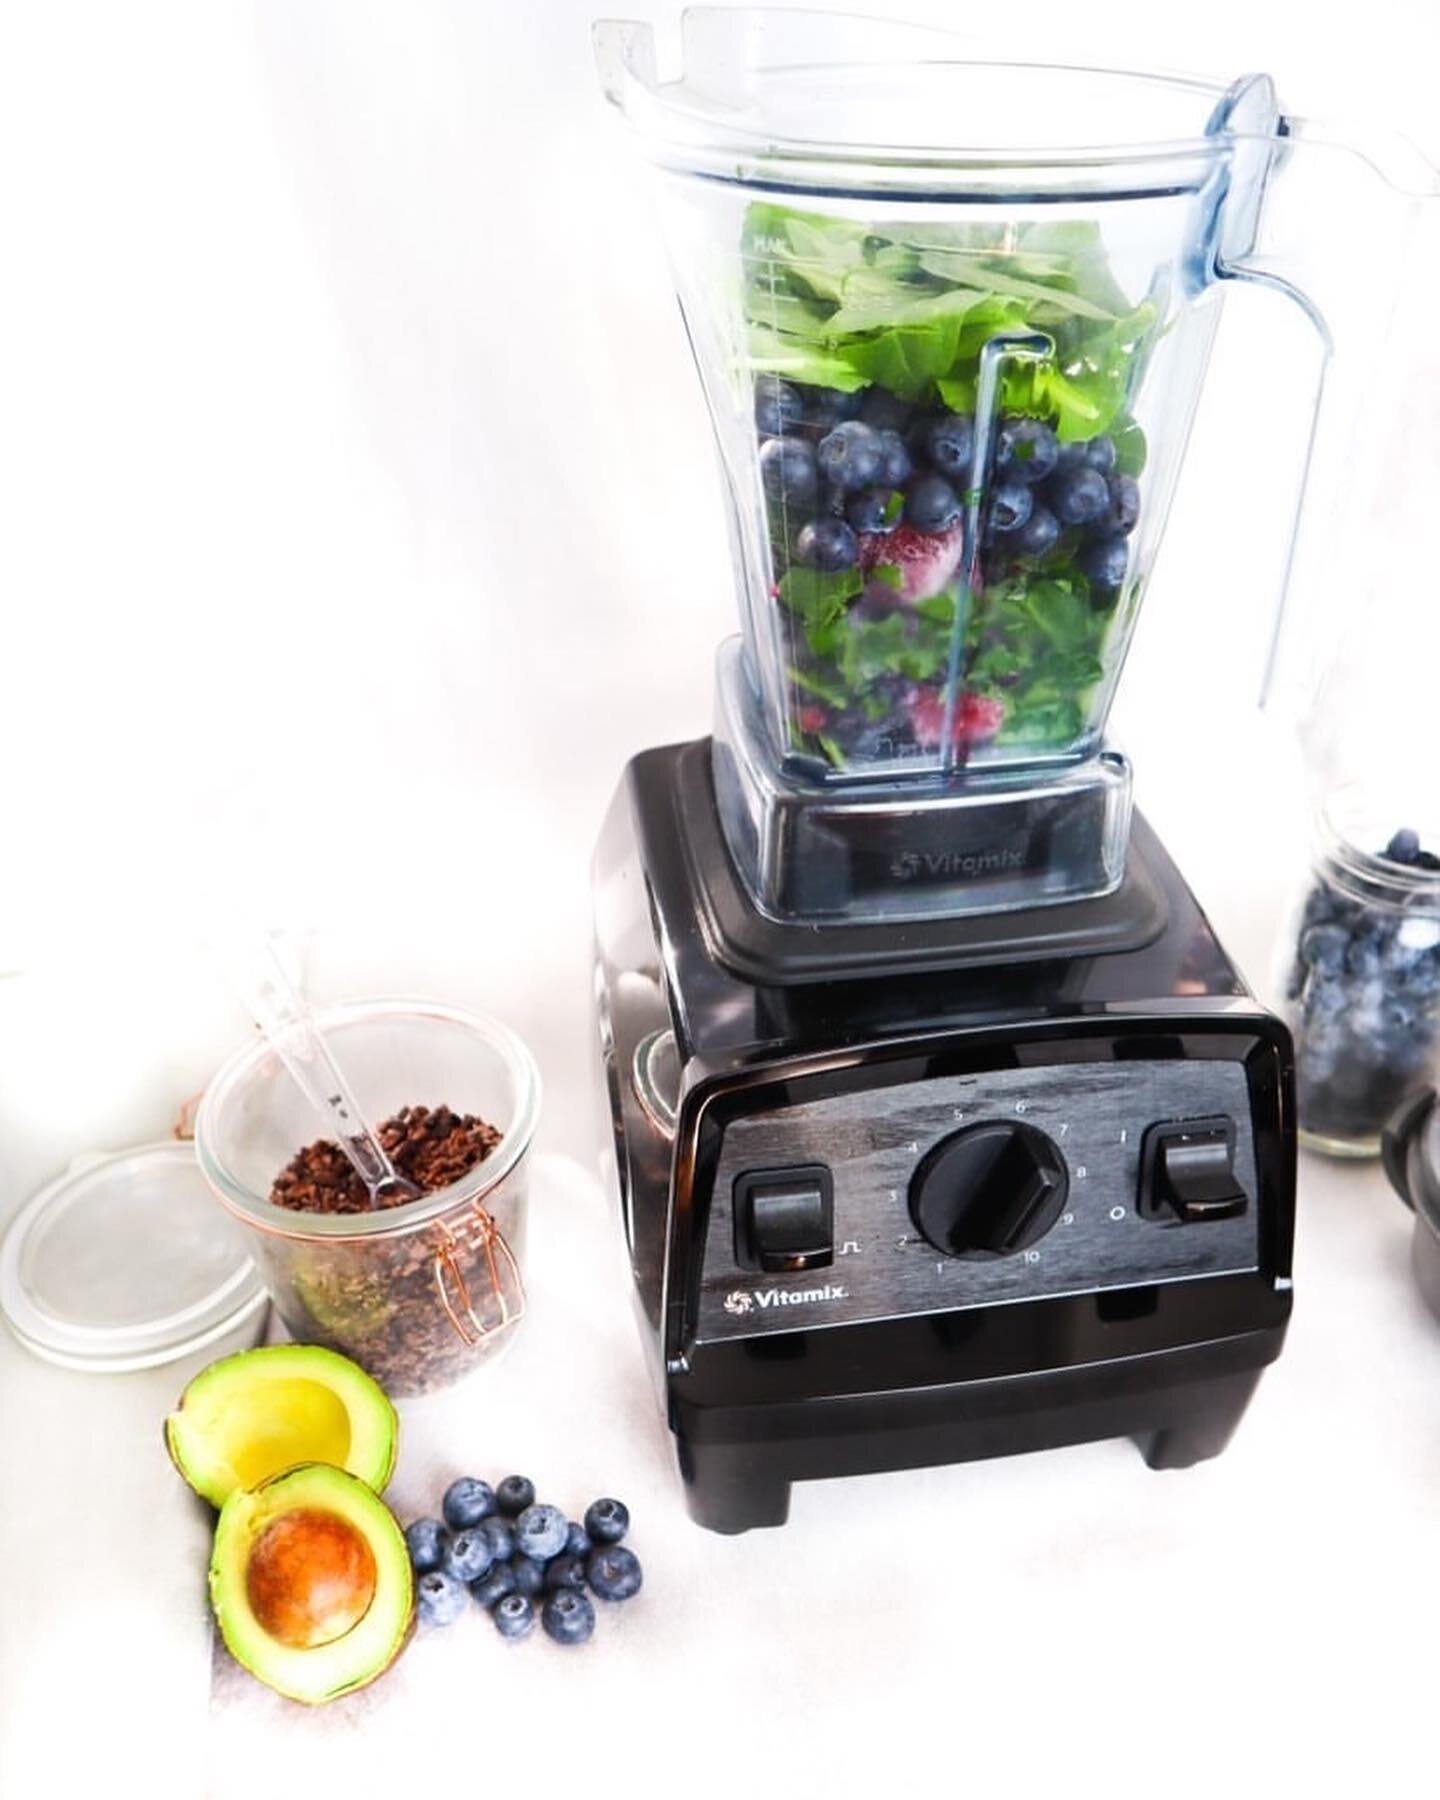 ✨VITAMIX GIVEAWAY ✨

@goood_eaats and I are SO excited to spread some holiday spirit and giveaway a Vitamix E310 blender! We are eternally grateful for the love and support we feel from you all and want to giveback to you all in a BIG way! 

To enter